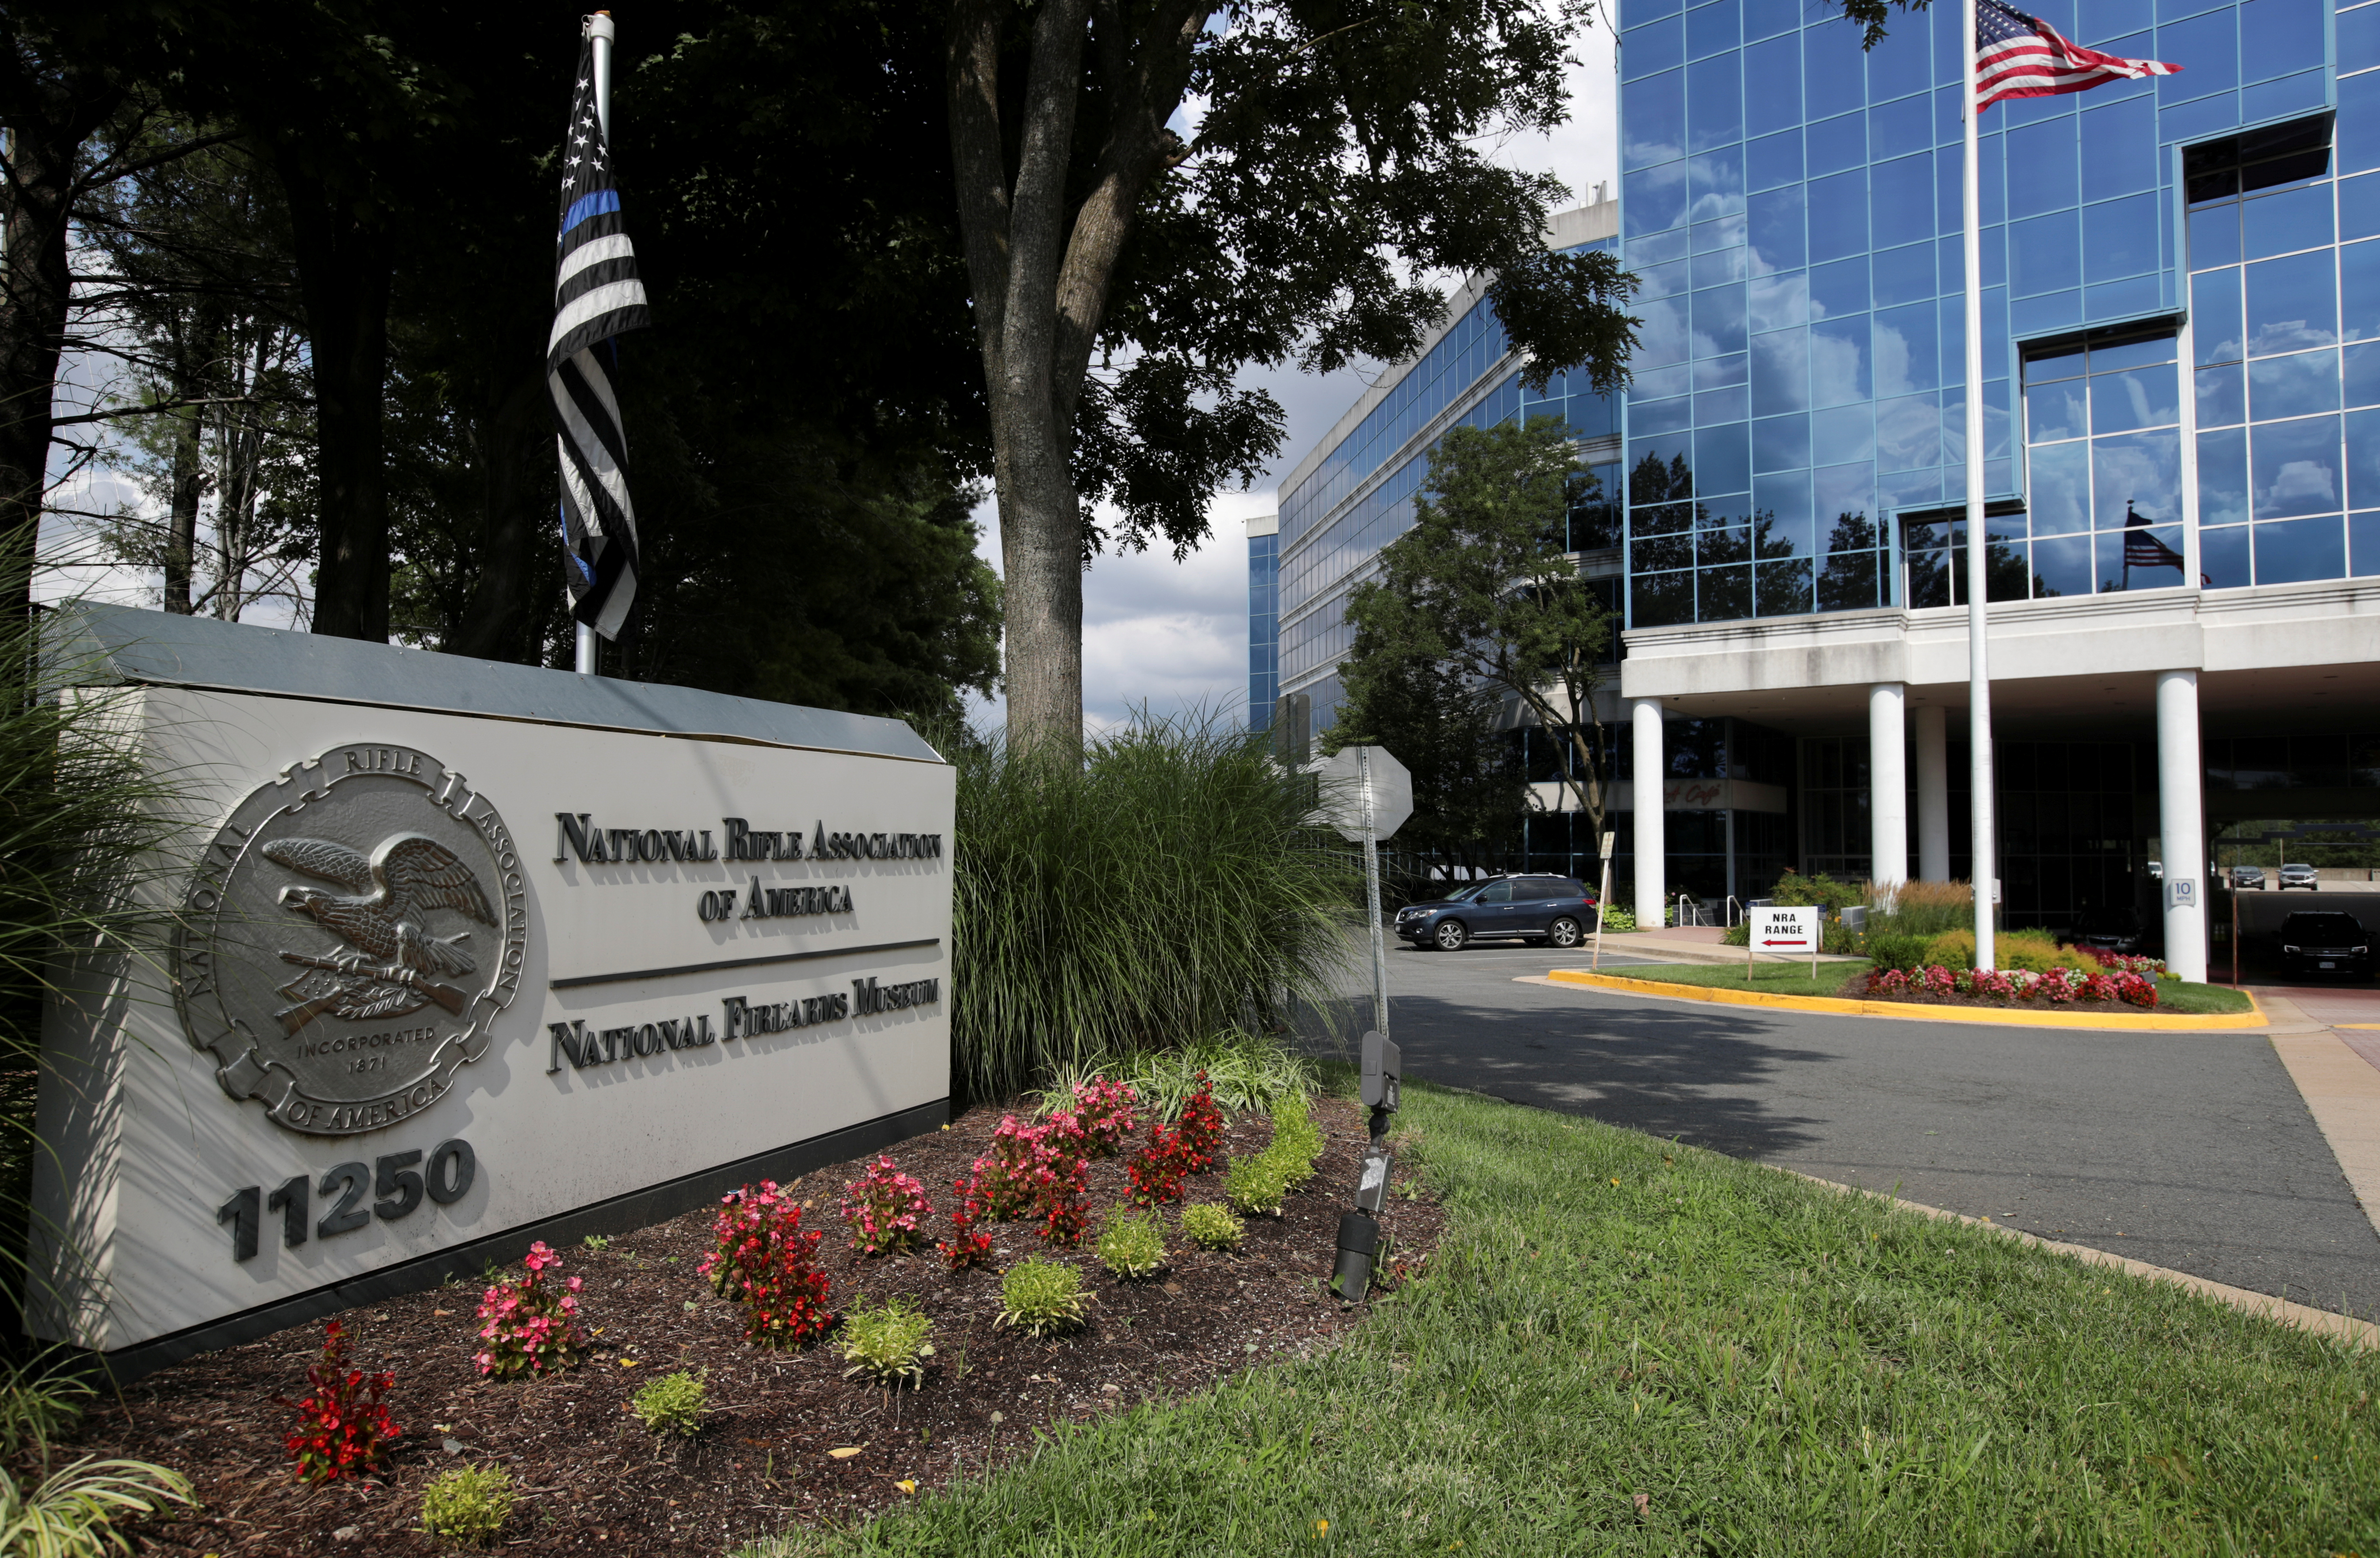 A general view shows the National Rifle Association (NRA) headquarters, in Fairfax